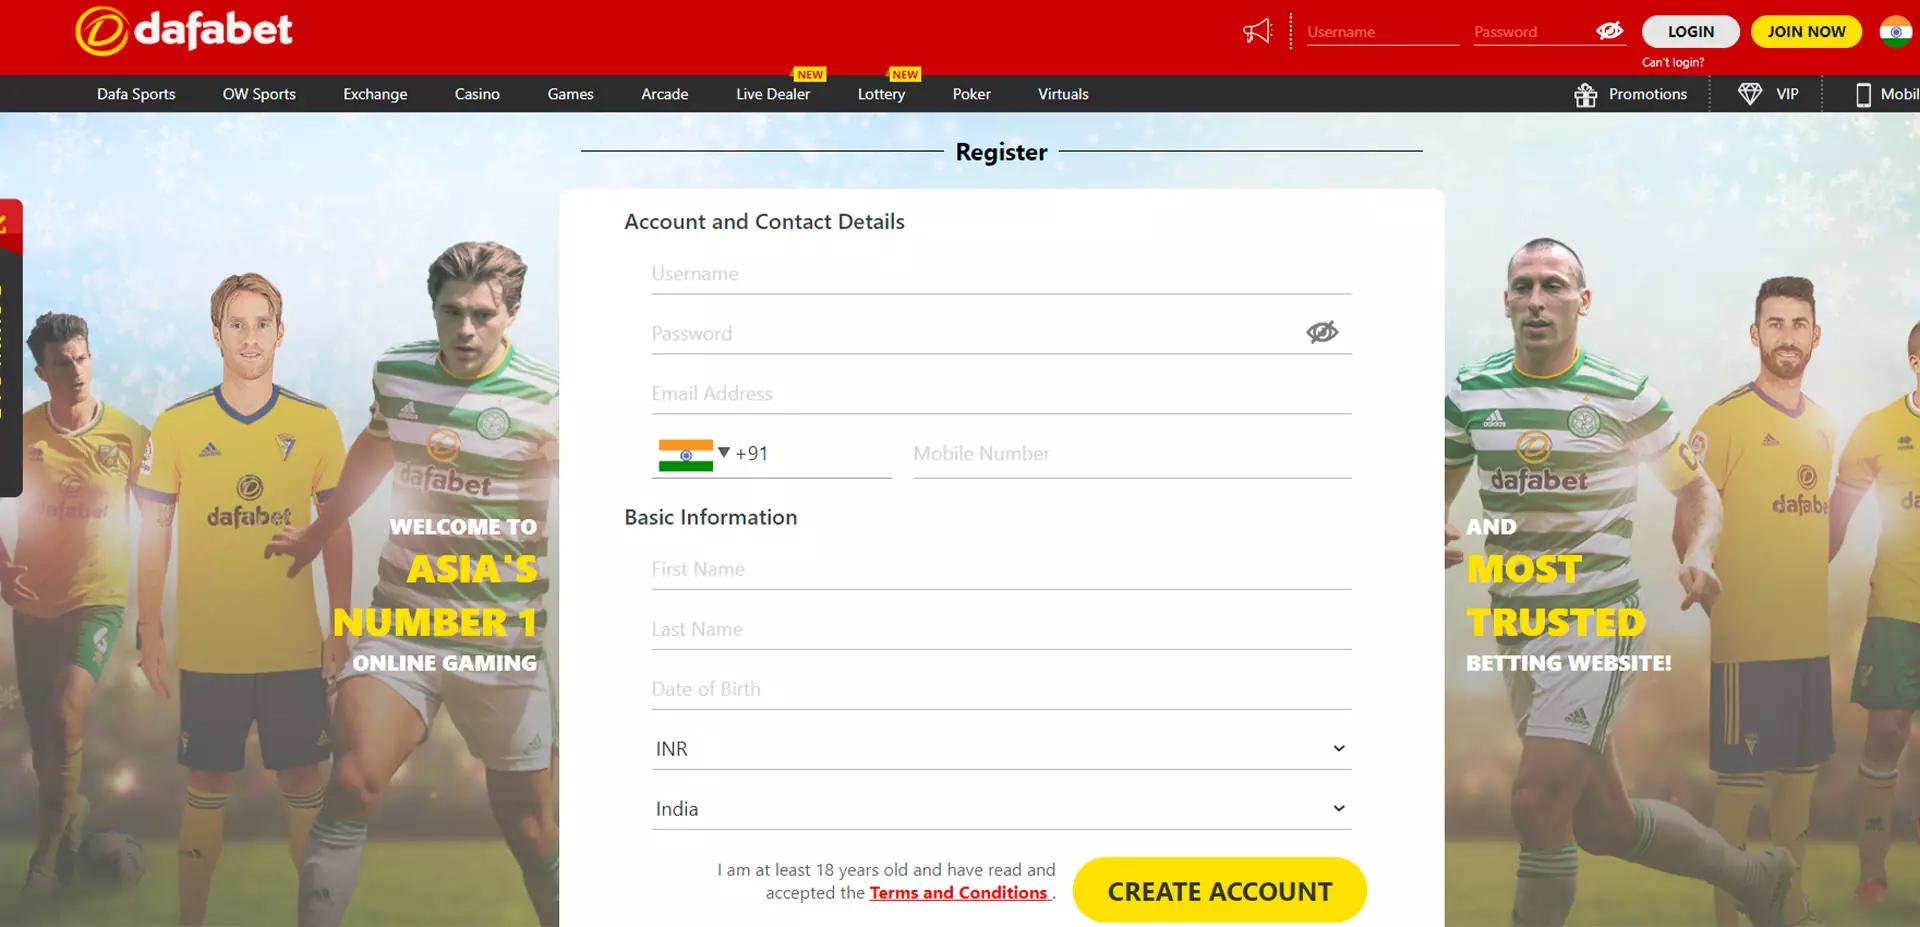 Provide only trustworthy information while registering at Dafabet.